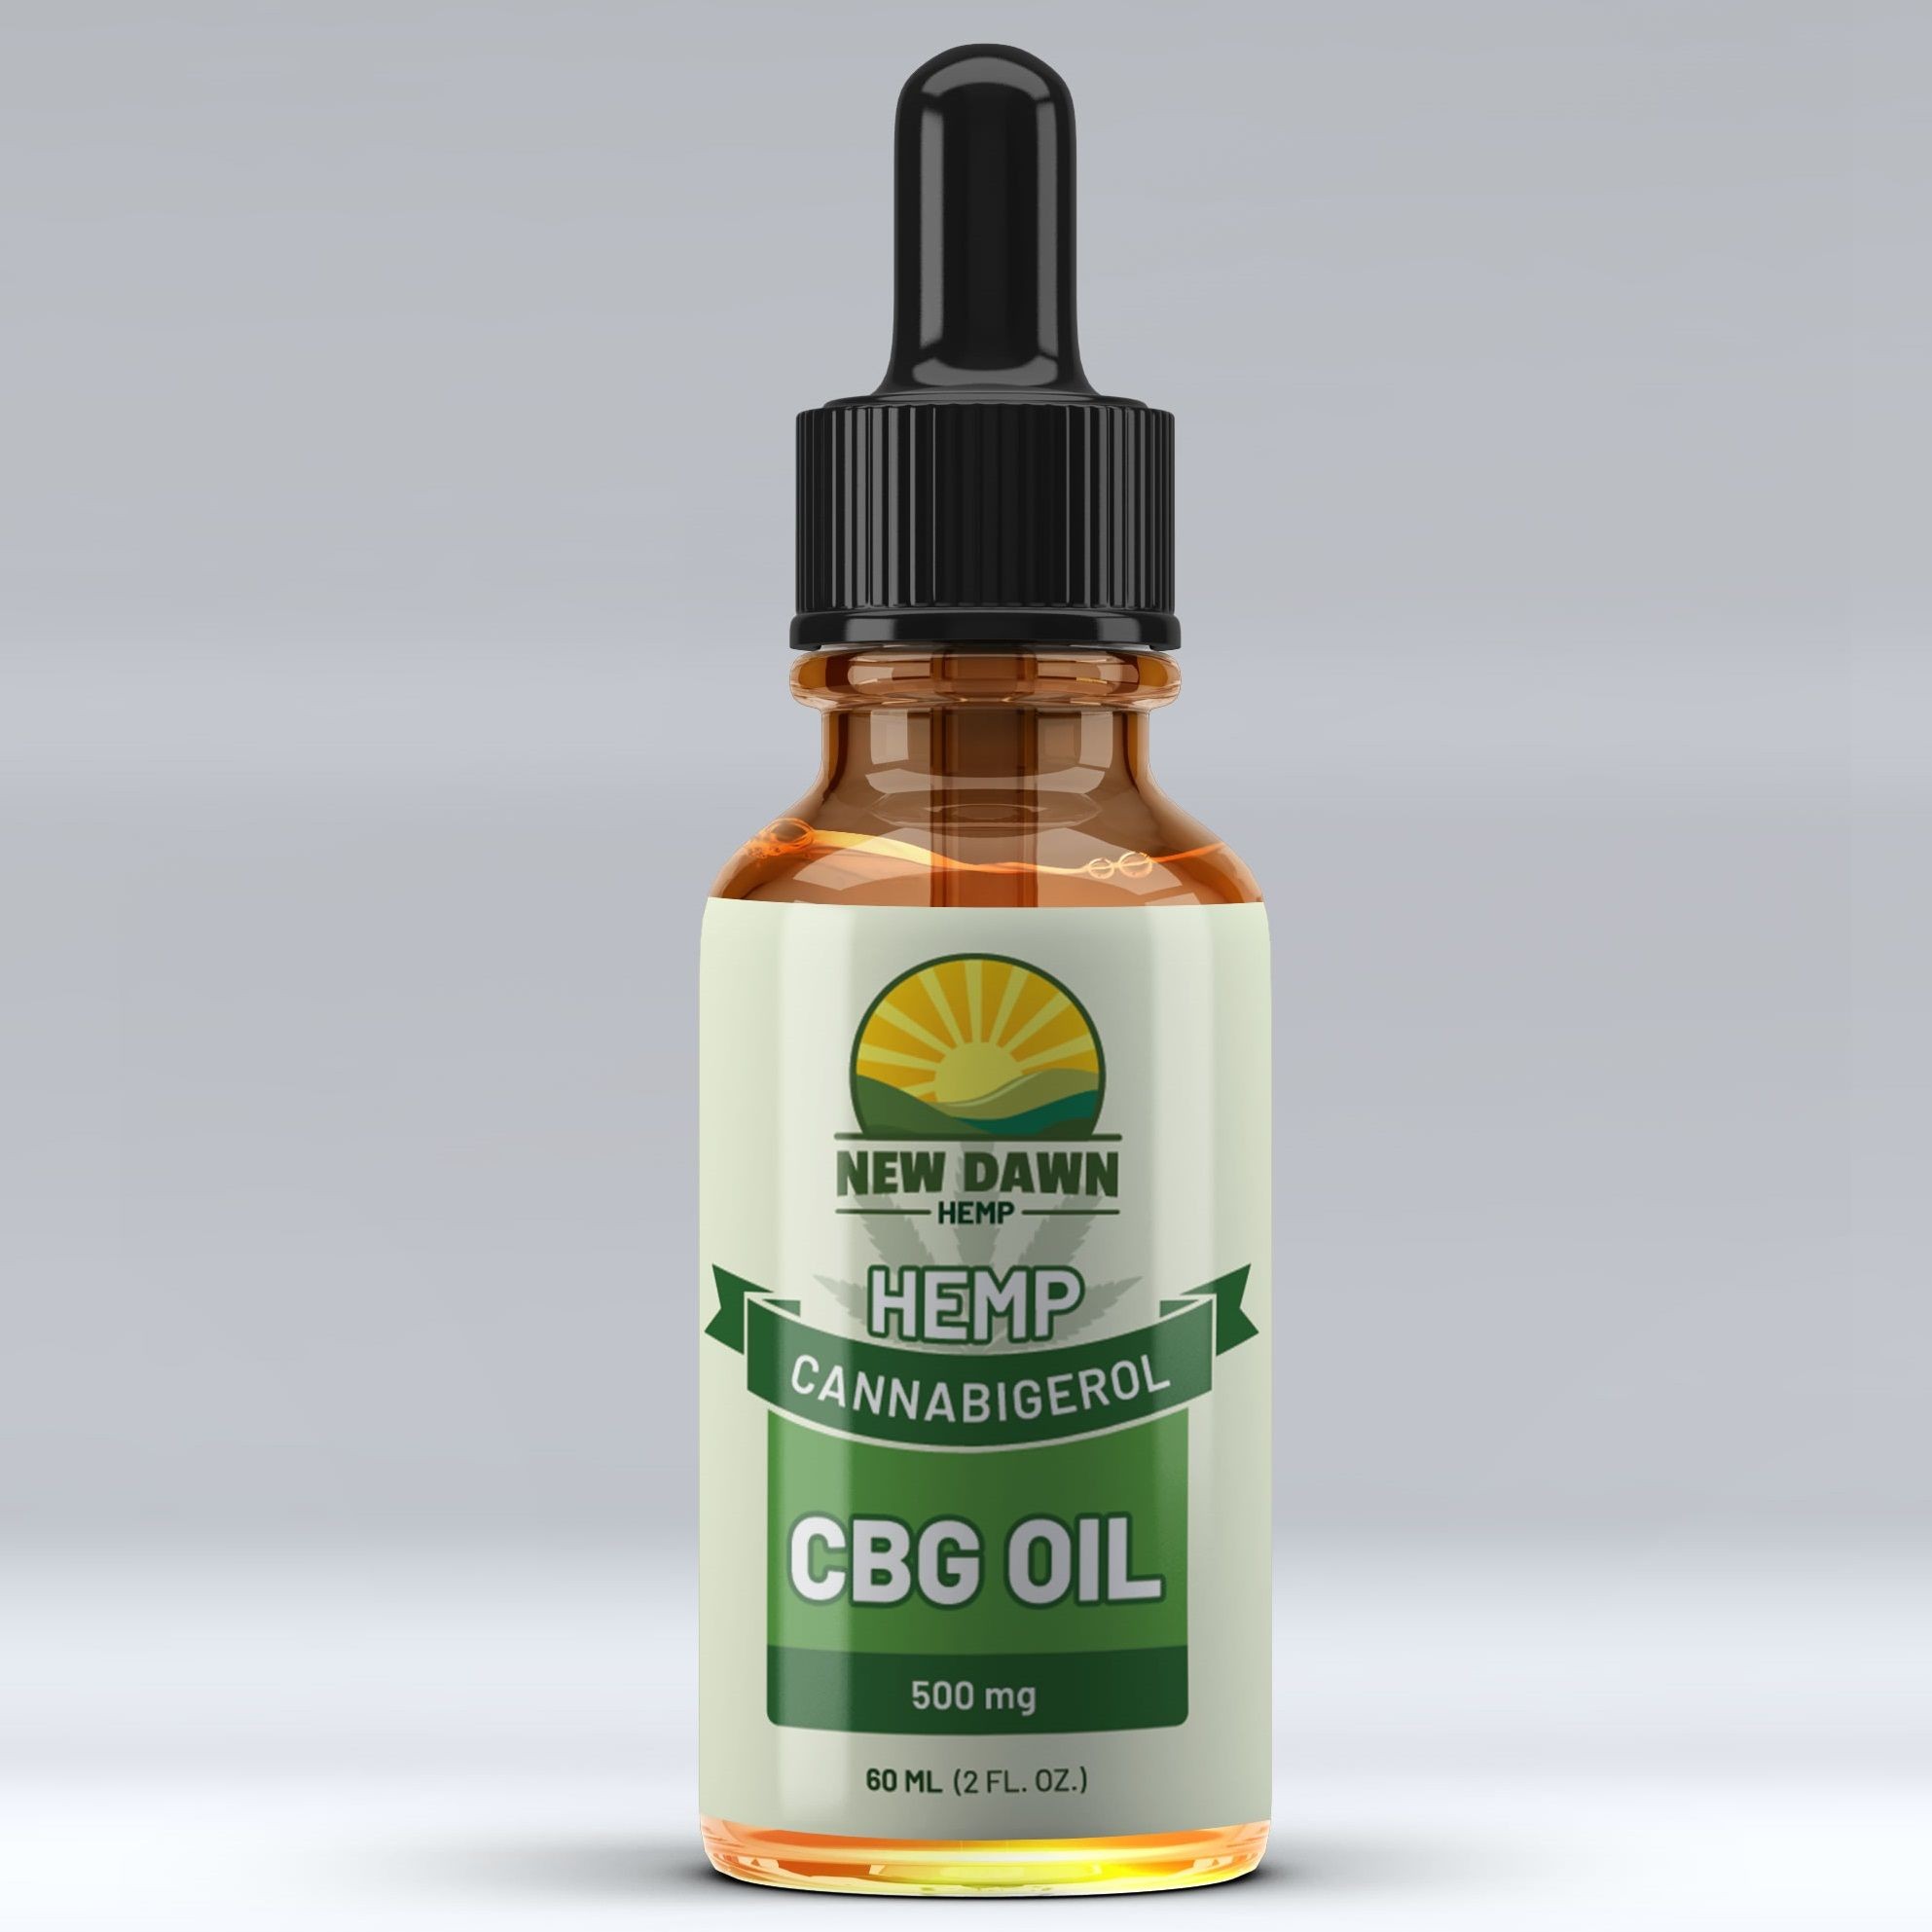 Cbg Products Online - Cbg|Gummies|Cbd|Effects|Thc|Cannabinoid|Hemp|Cannabinoids|Image|Products|Courtesy|Product|Way|Benefits|Dosage|Everyone|Oil|People|Spectrum|Others|Gummy|Time|Dosages|Advantages|Cannabis|Results|Treatment|Body|Stomach|Tincture|Pain|Drug|Approach|Isolate|Side|Dog|Ingredients|List|State|Cannabigerol|Cbg Gummies|Psychoactive Effects|Full Spectrum Gummies|Image Courtesy|Full-Spectrum Cbd Products|Different Dosages|Right Dosage|Empty Stomach|Cbd Gummies|Cbd Isolate|Side Effects|Different Effects|Dog Cbg Gummies|Drug Test|Full-Spectrum Cbd Product|Few Things|Chronic Pain|Full-Spectrum Cbd|Psychotropic Effects|Final Thoughts|Right Dosage Everyone|Final Tips|Same Results|Cbg Ratio|Appetite Loss|Powerful Hunger Stimulant|Whereas Cbd|Thc Ratio Gummies|Dangerous Consequence|Numerous Diseases